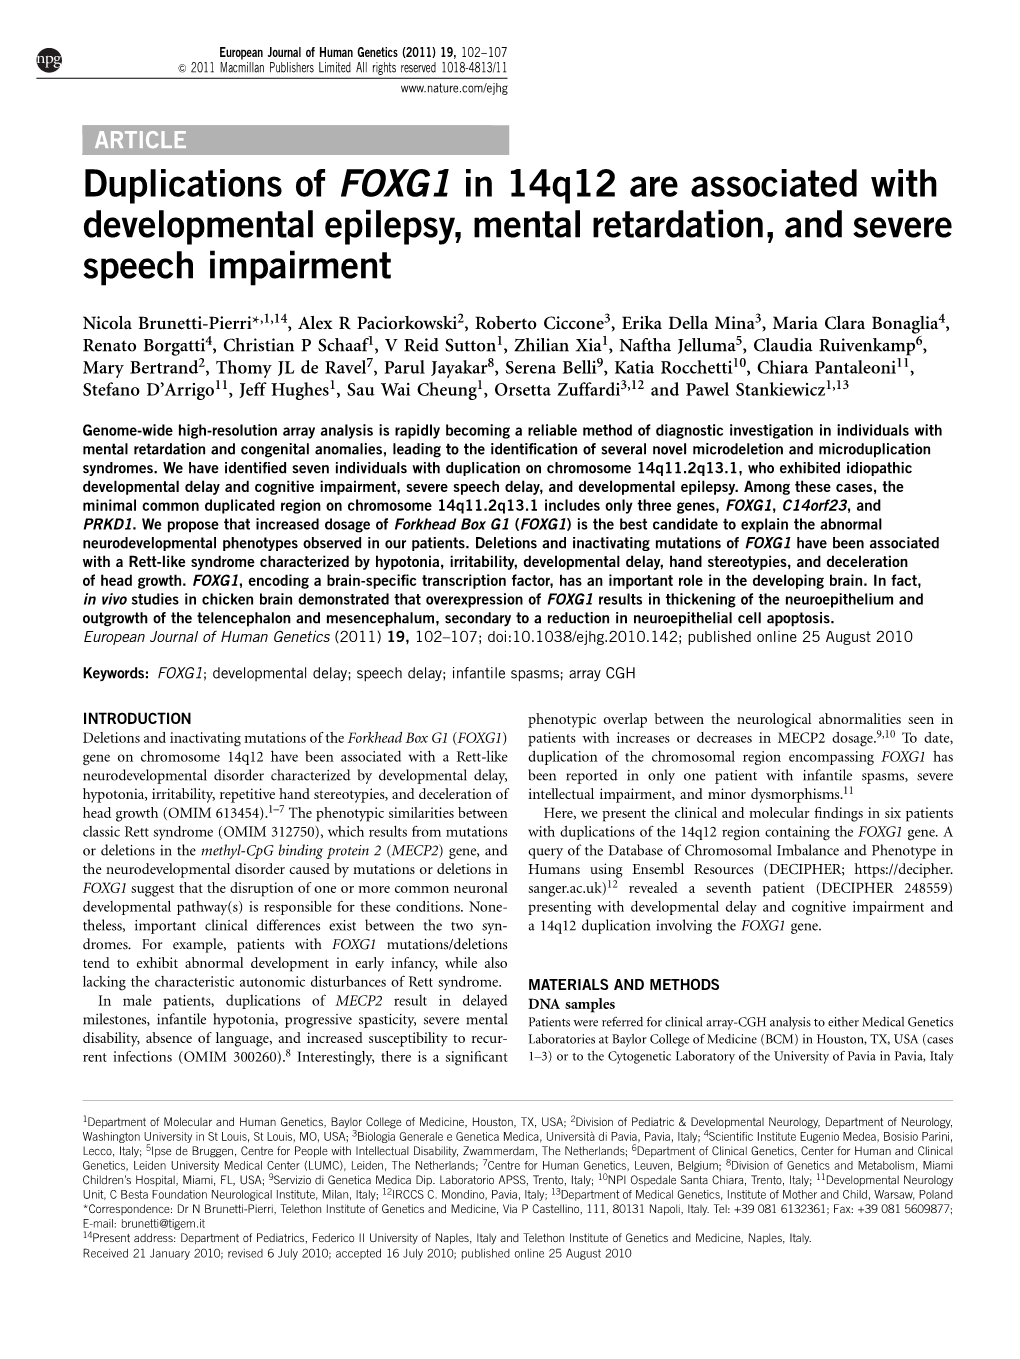 Duplications of FOXG1 in 14Q12 Are Associated with Developmental Epilepsy, Mental Retardation, and Severe Speech Impairment